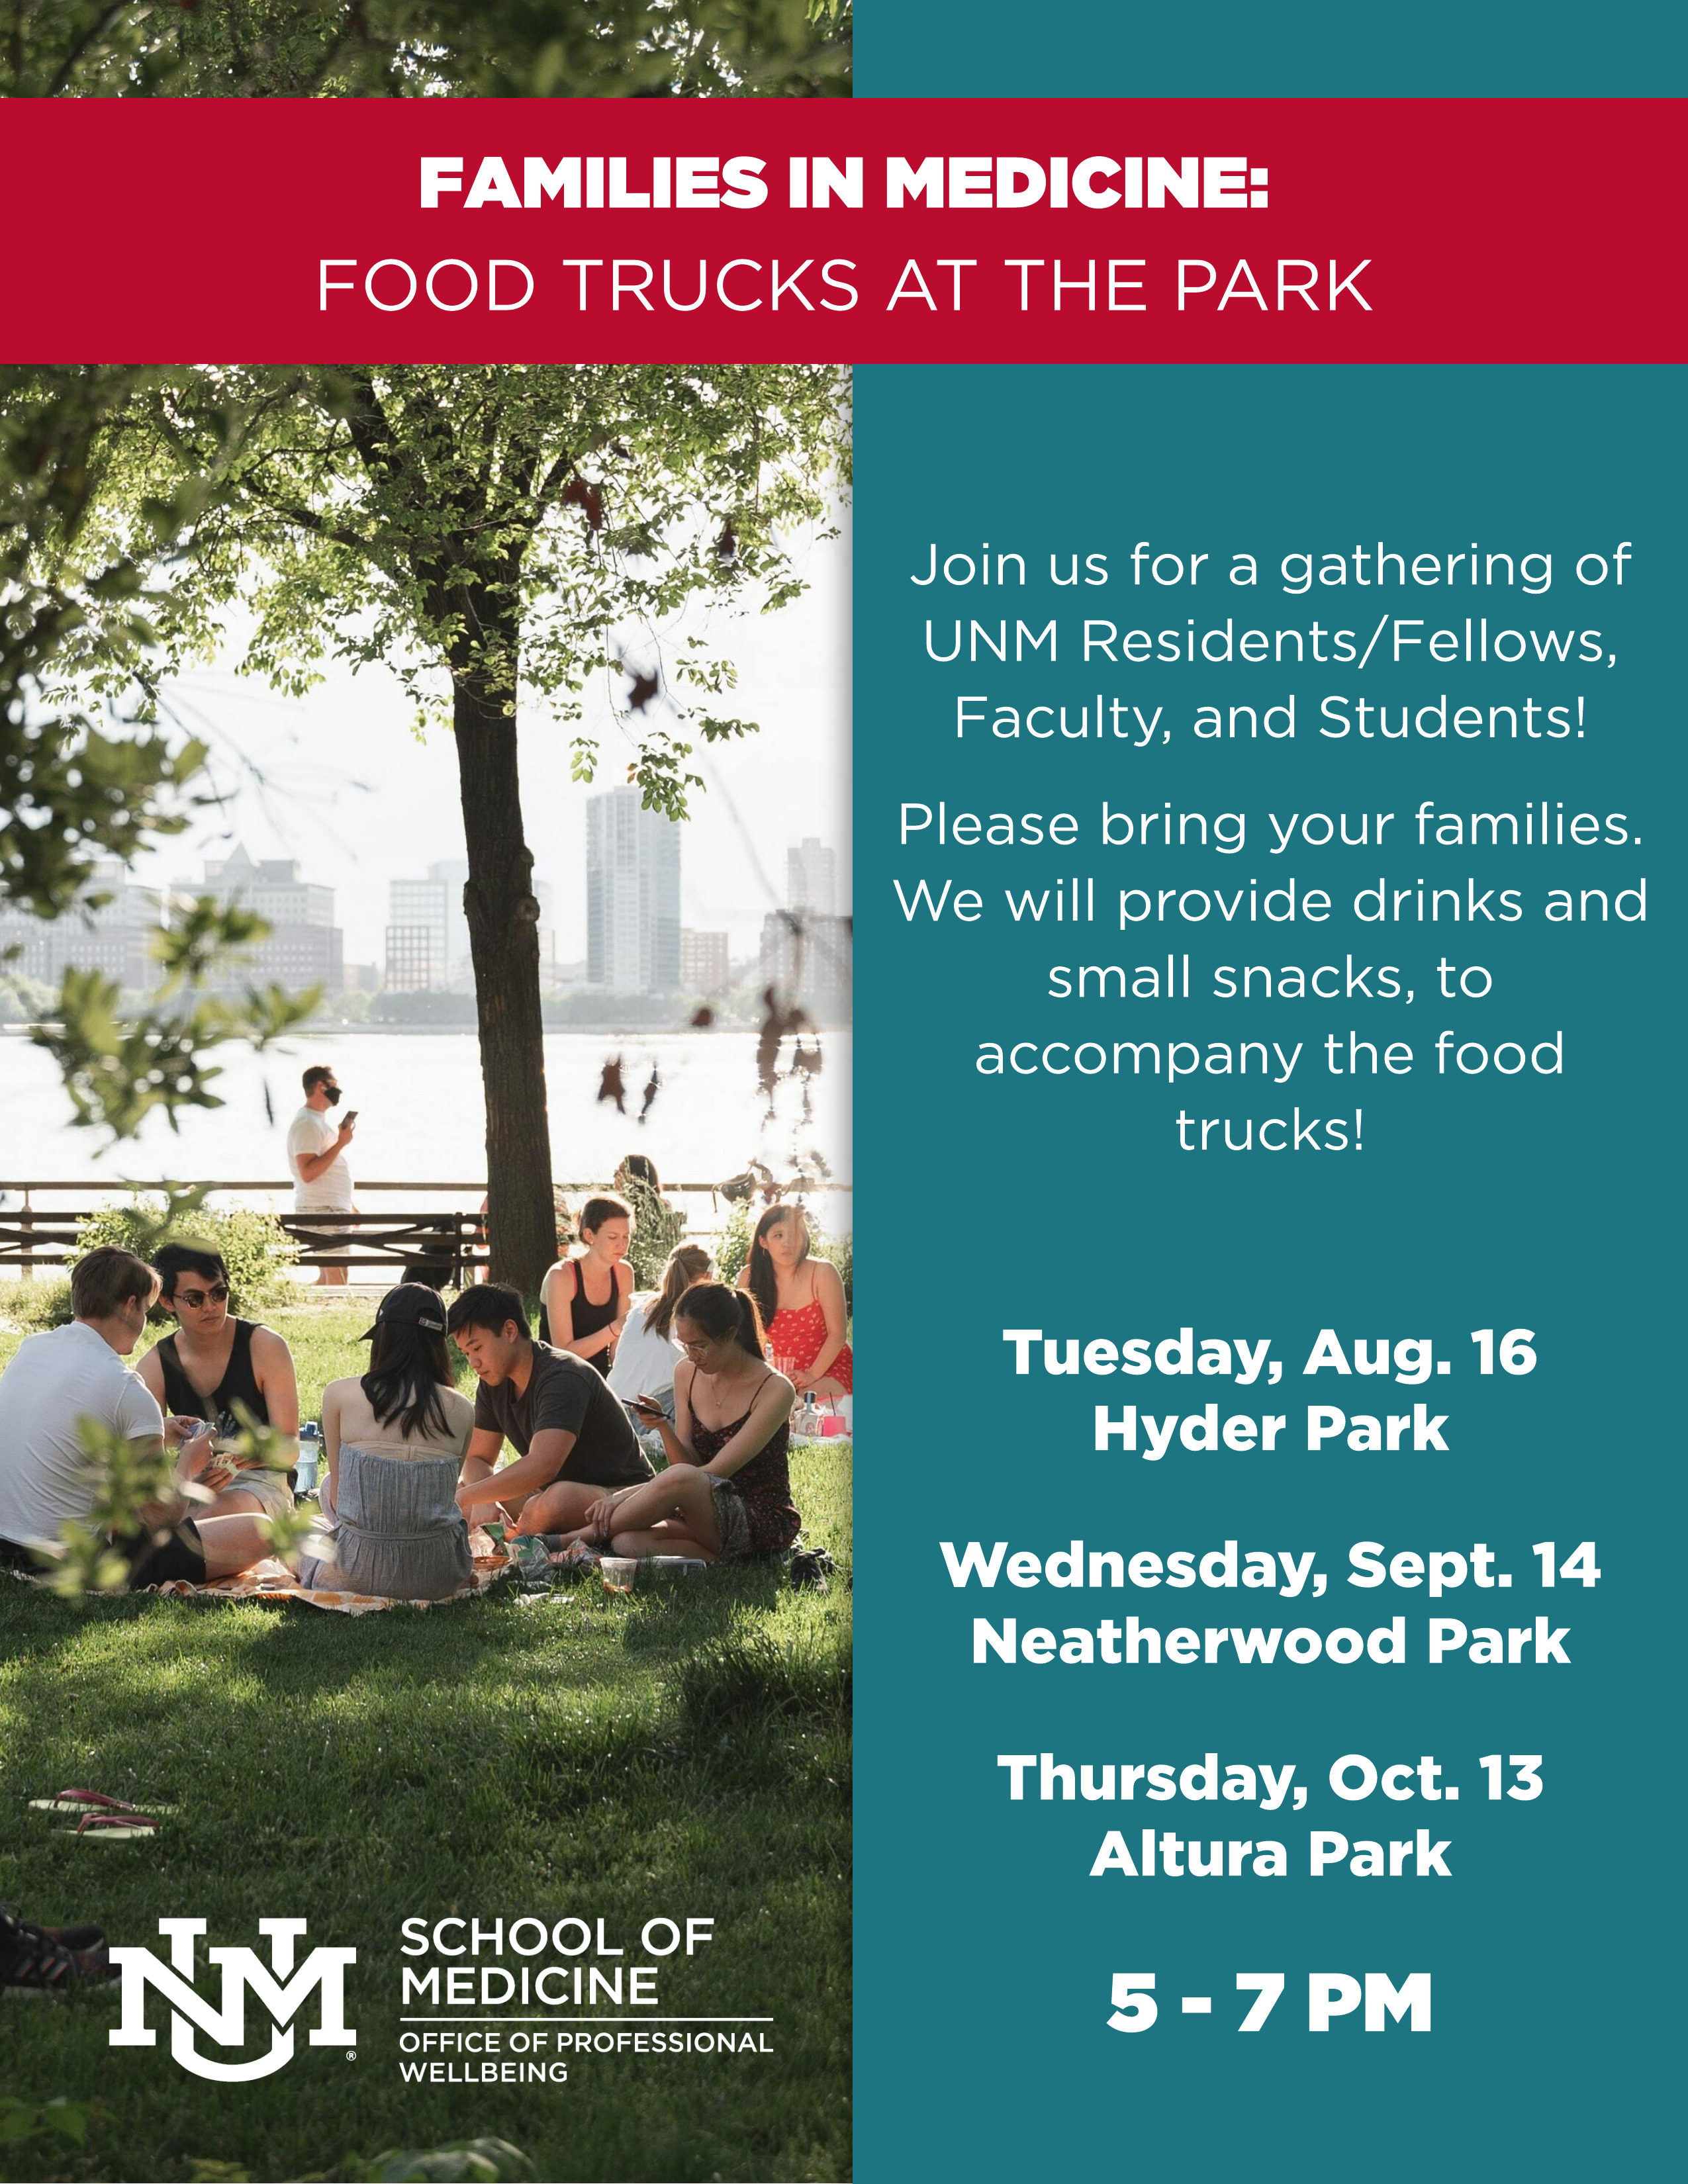 Families in Medicine: Food Trucks at the Park